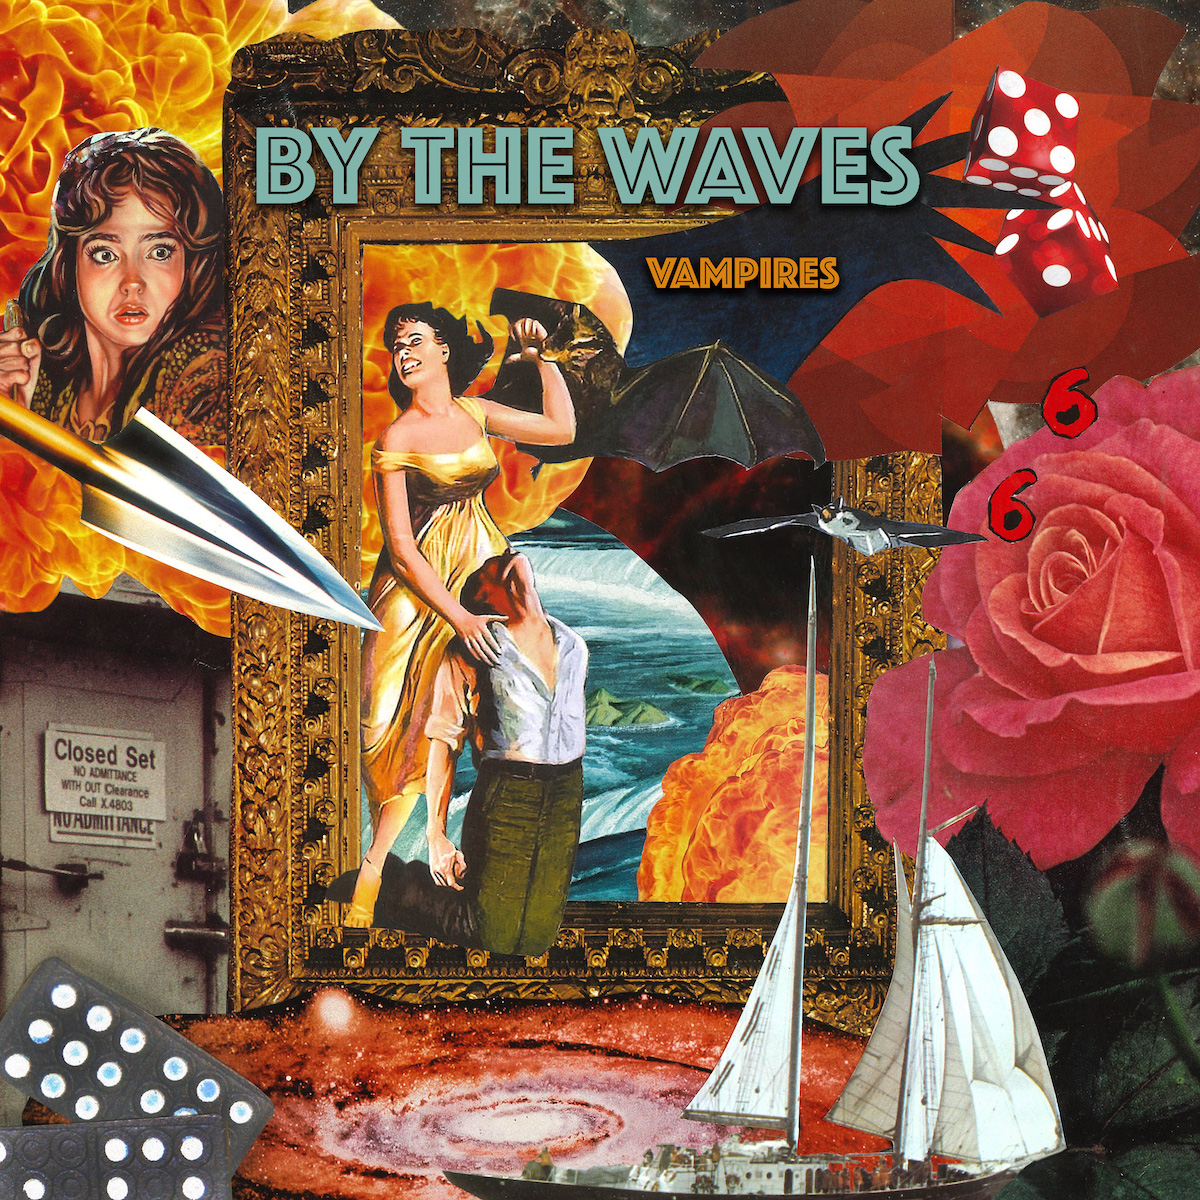 LISTEN: “Vampires” by By the Waves